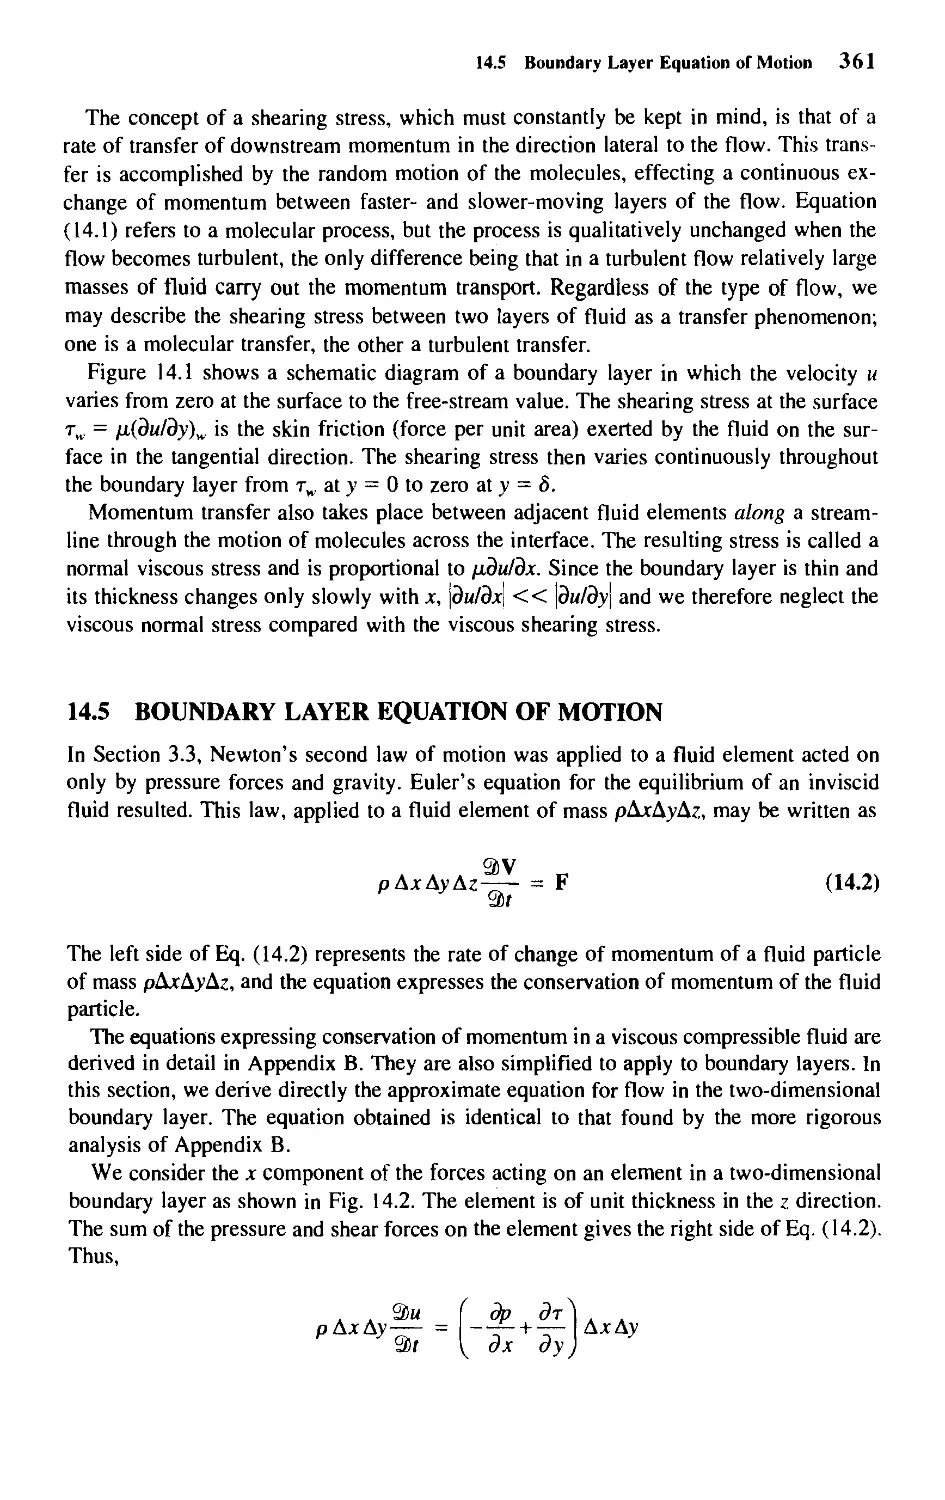 14.5 - Boundary Layer Equation of Motion